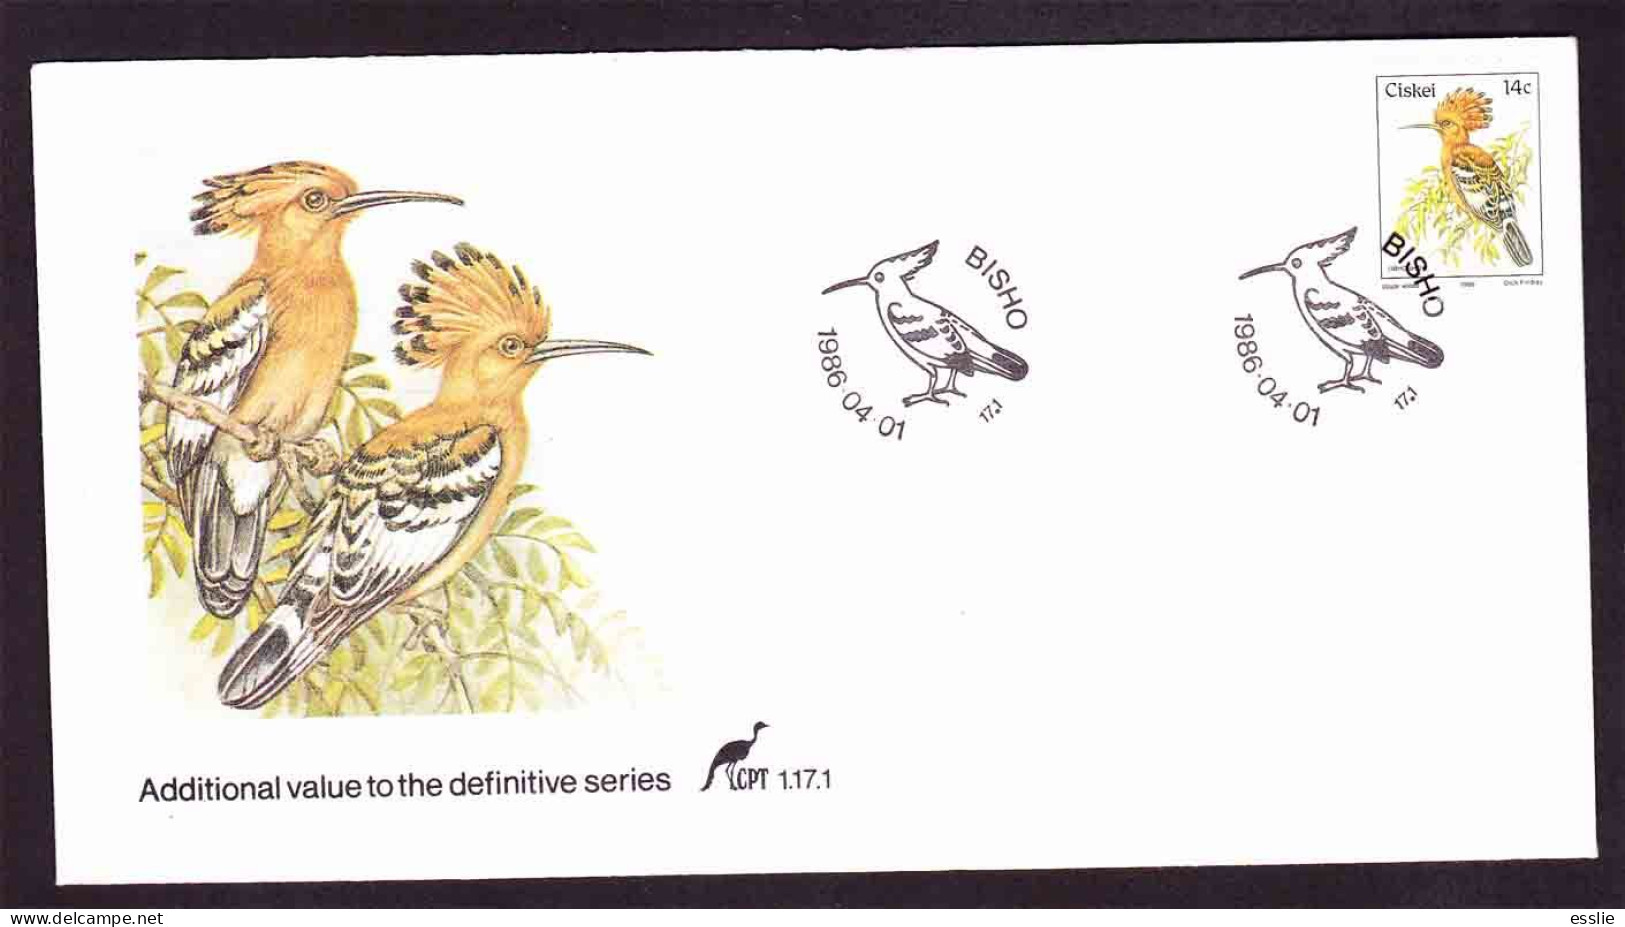 Ciskei - 1986 (1981) - Birds First Definitive - Additional Value - Hoopoe - First Day Cover - Small - Cuco, Cuclillos